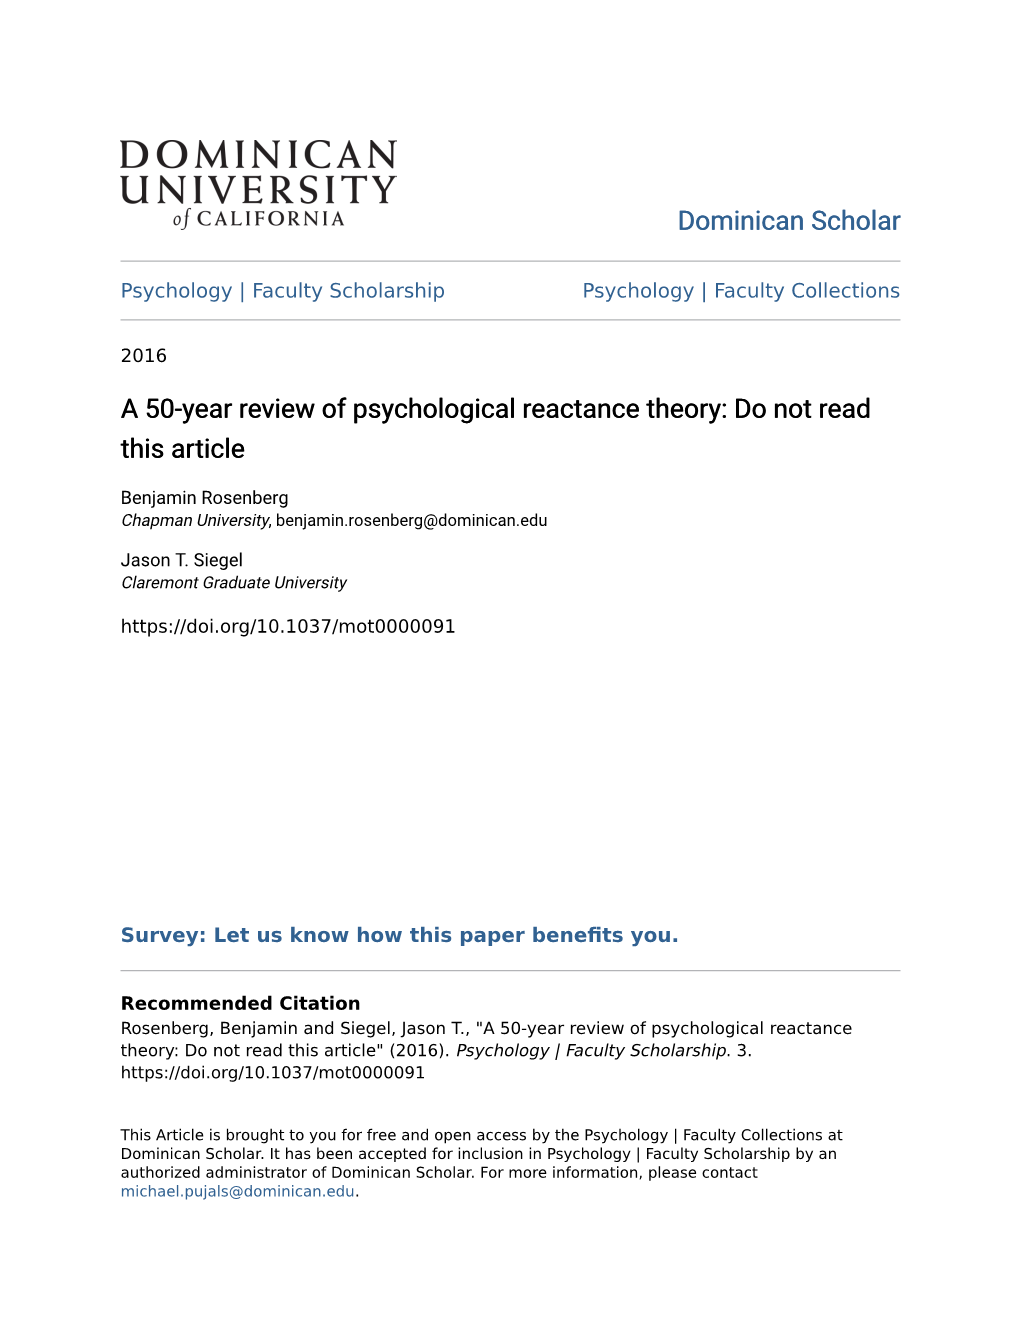 A 50-Year Review of Psychological Reactance Theory: Do Not Read This Article